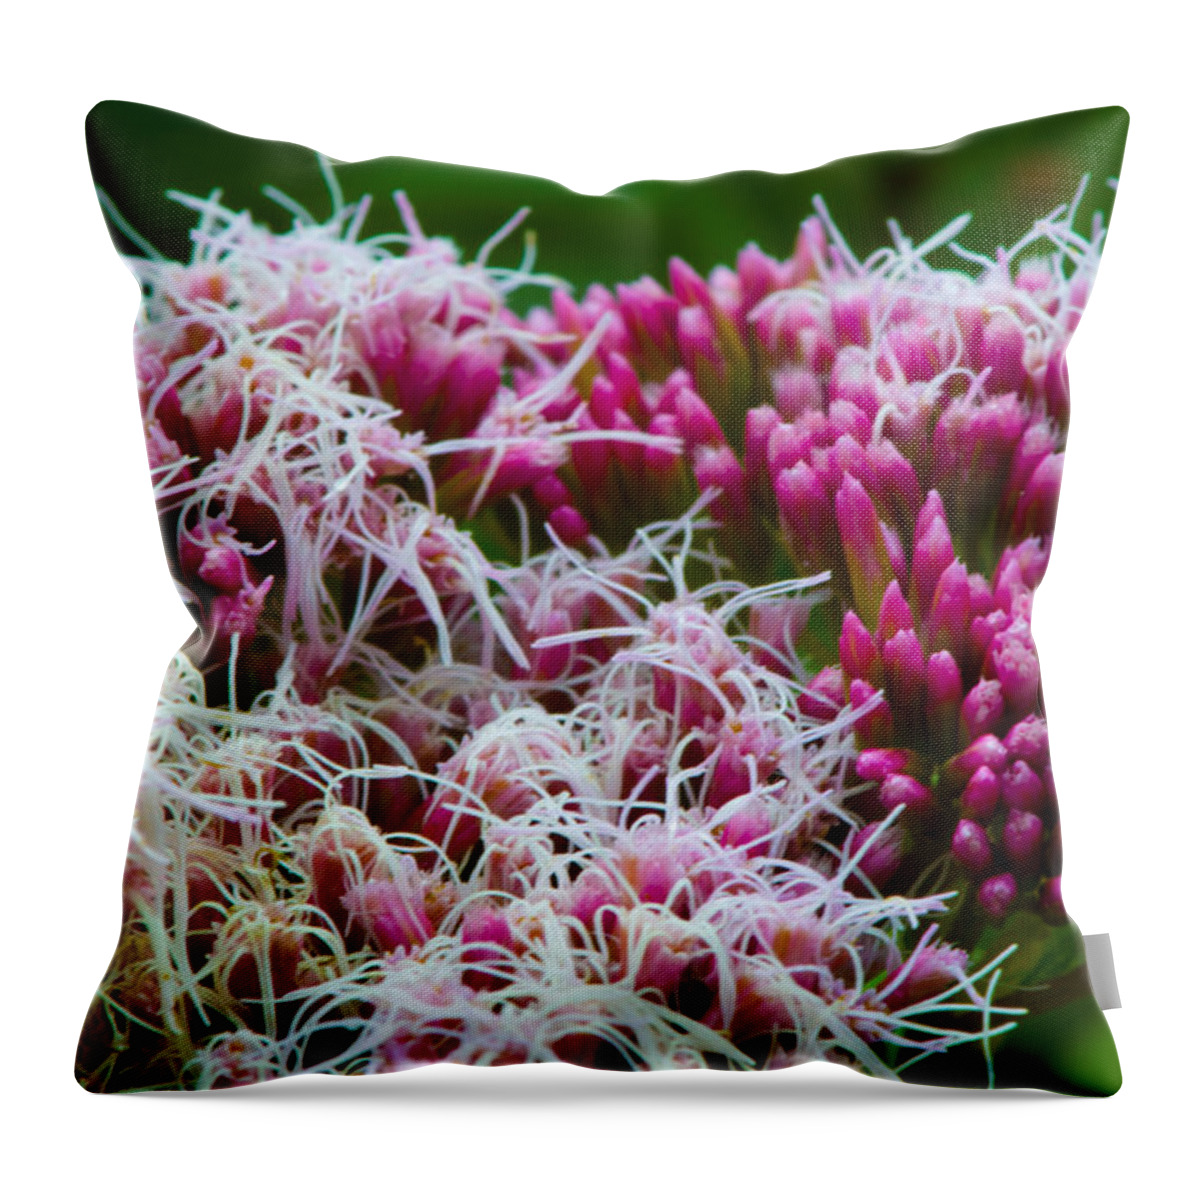 Hemp-agrimony Throw Pillow featuring the photograph Truly Unruly by Rob Hemphill